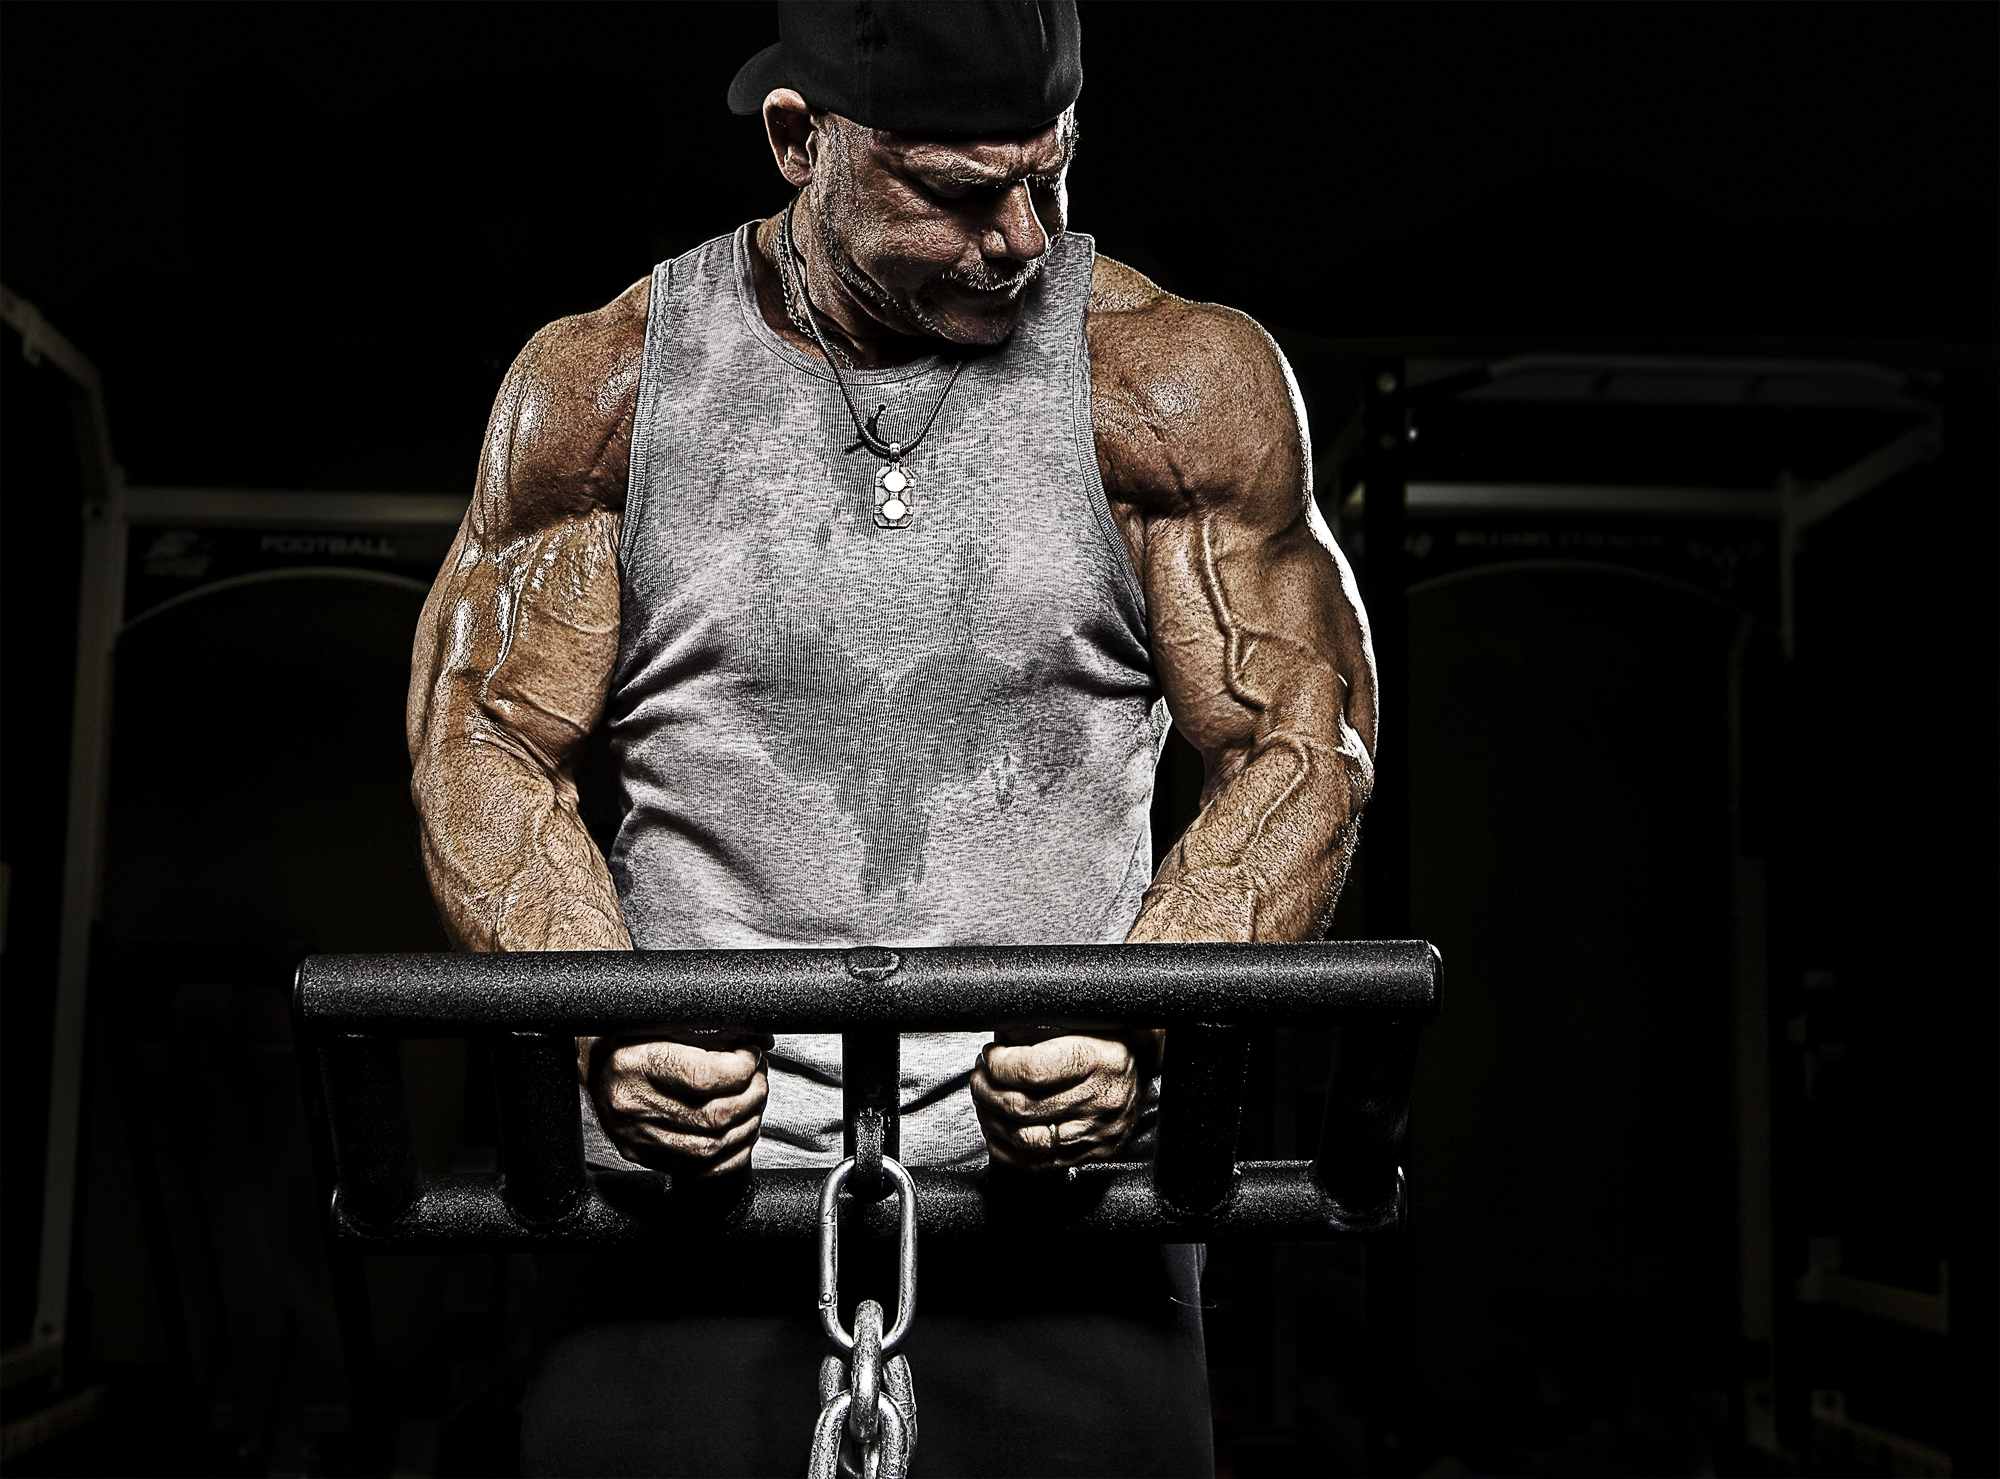 The sleeve-splitting arms workout - Muscle & Fitness